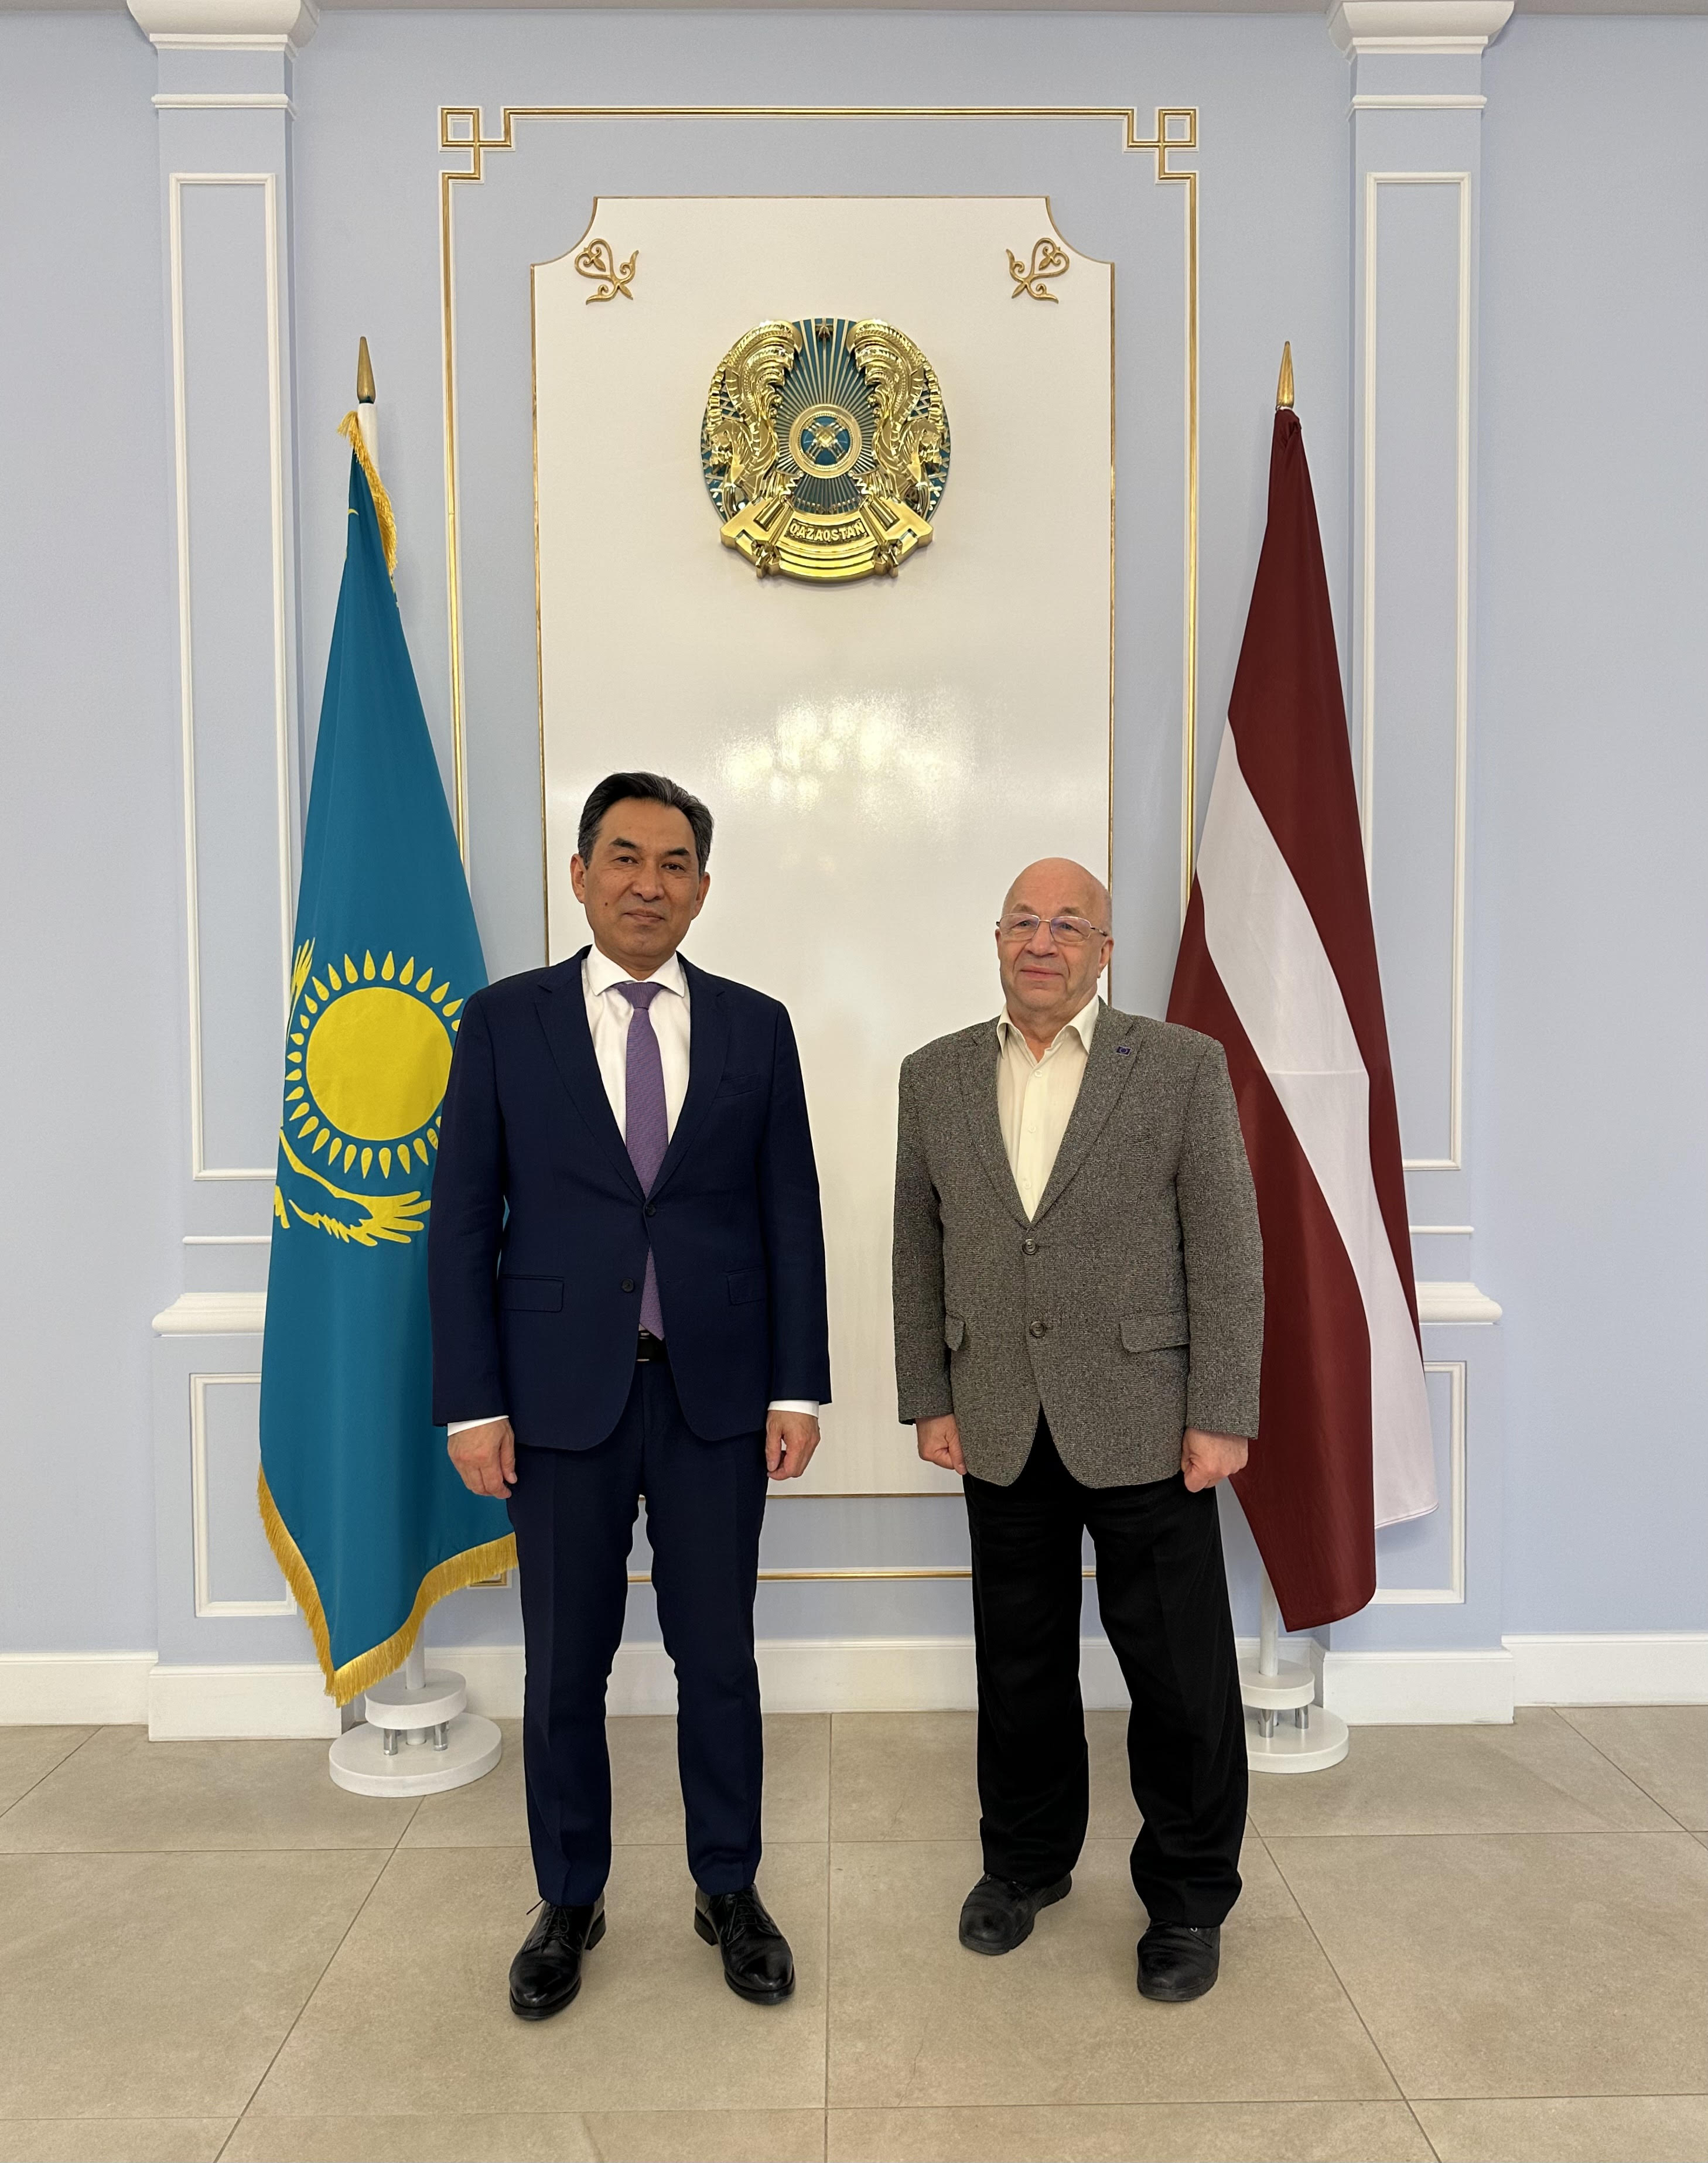 Kazakhstan and Latvia have confirmed their interest in strengthening trade relations